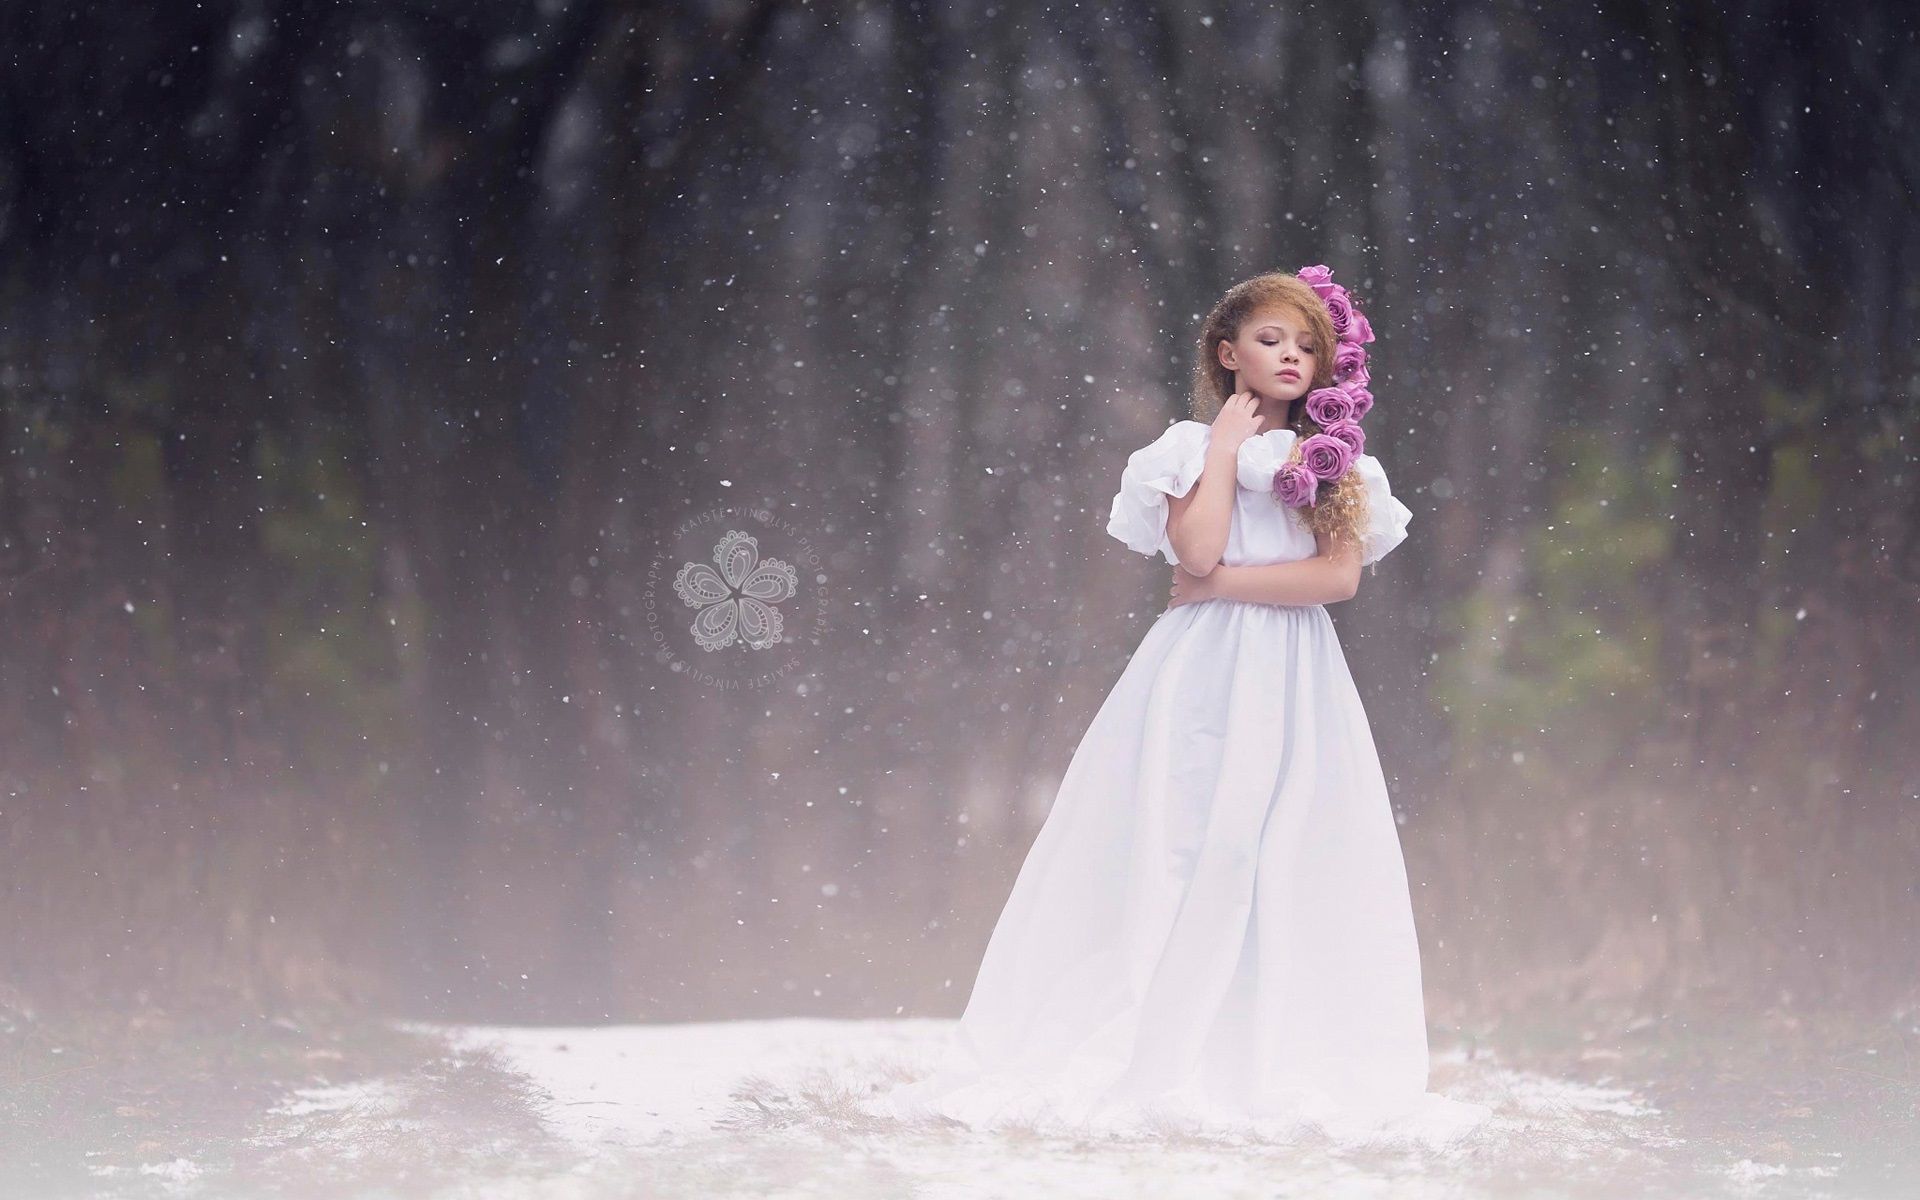 Cute Little Girl, White Dress, Snow 640x1136 IPhone 5 5S 5C SE Wallpaper, Background, Picture, Image